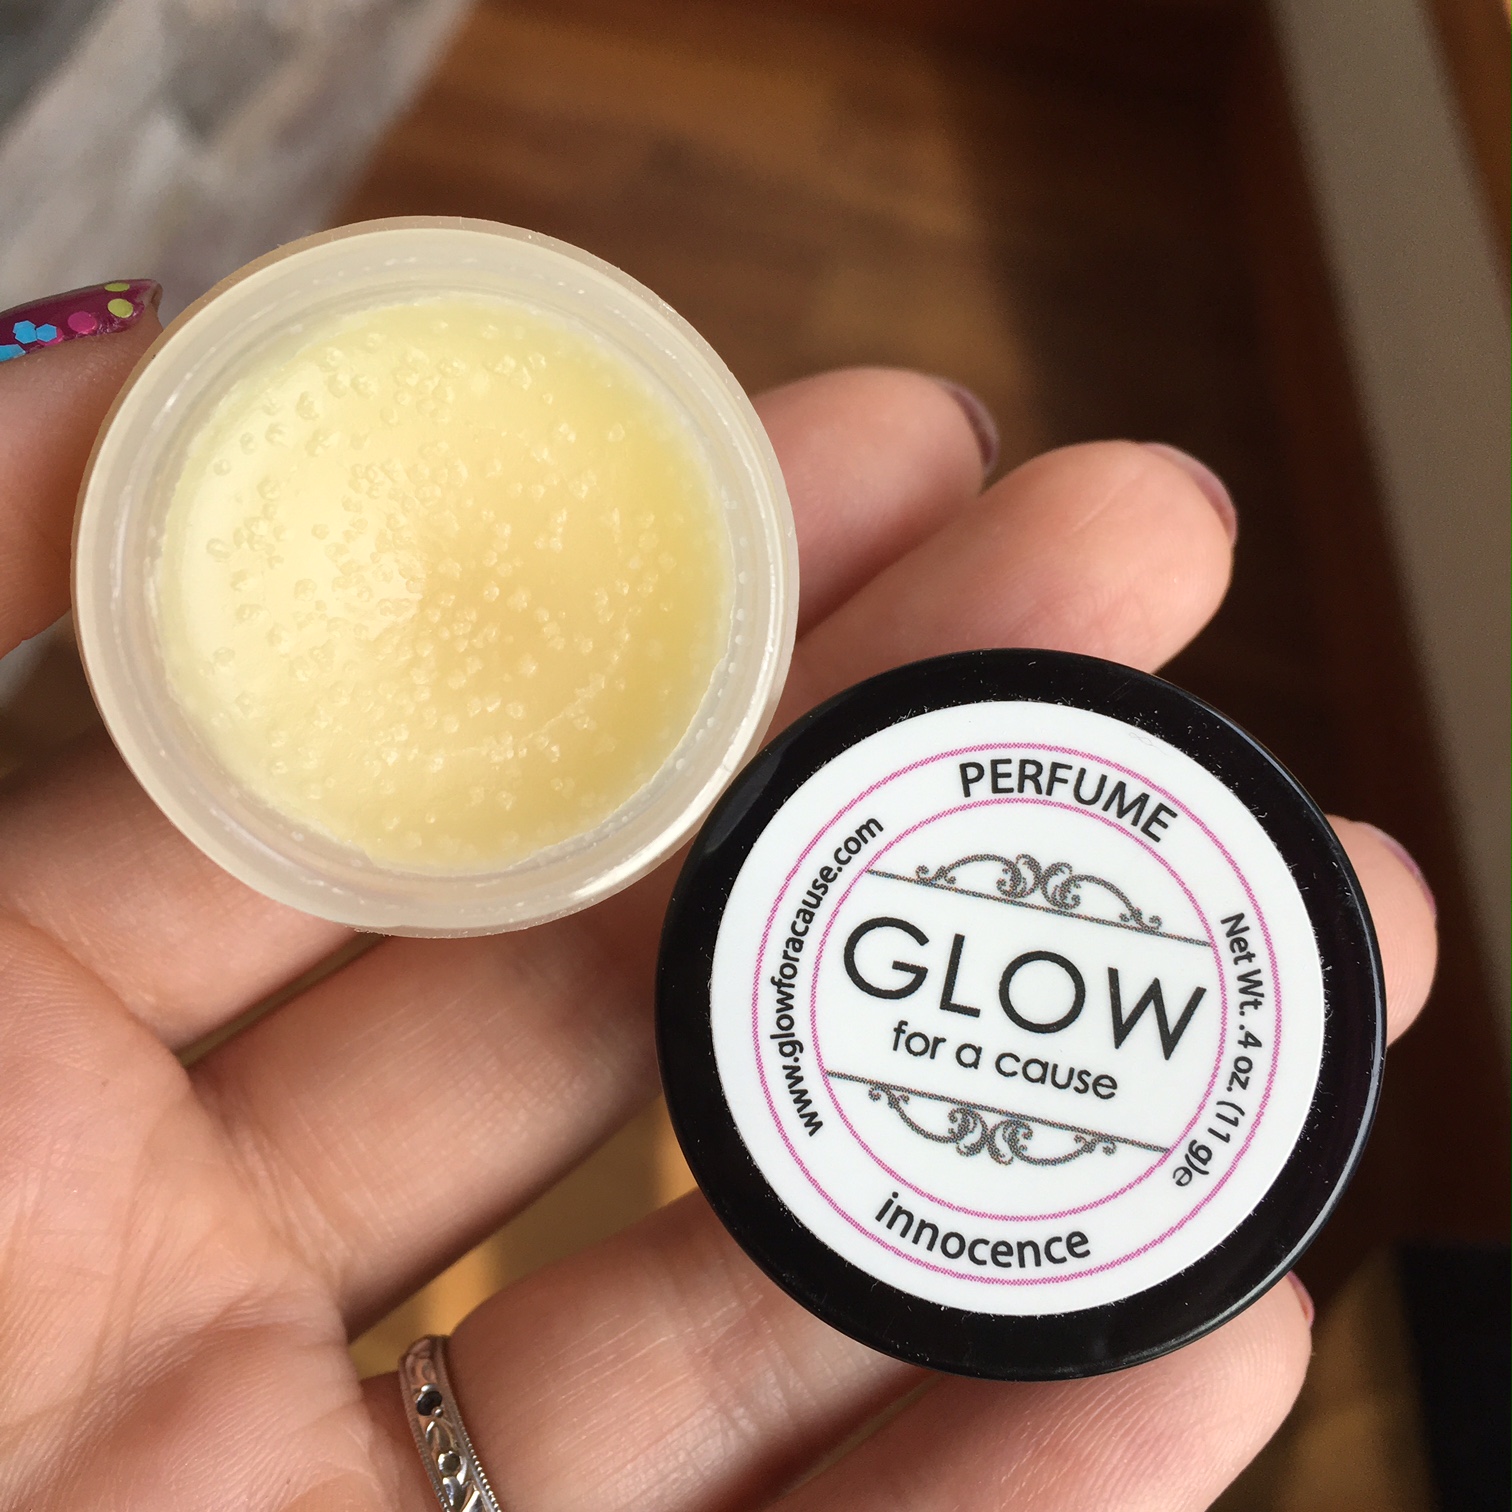 Glow for A Cause solid perfume